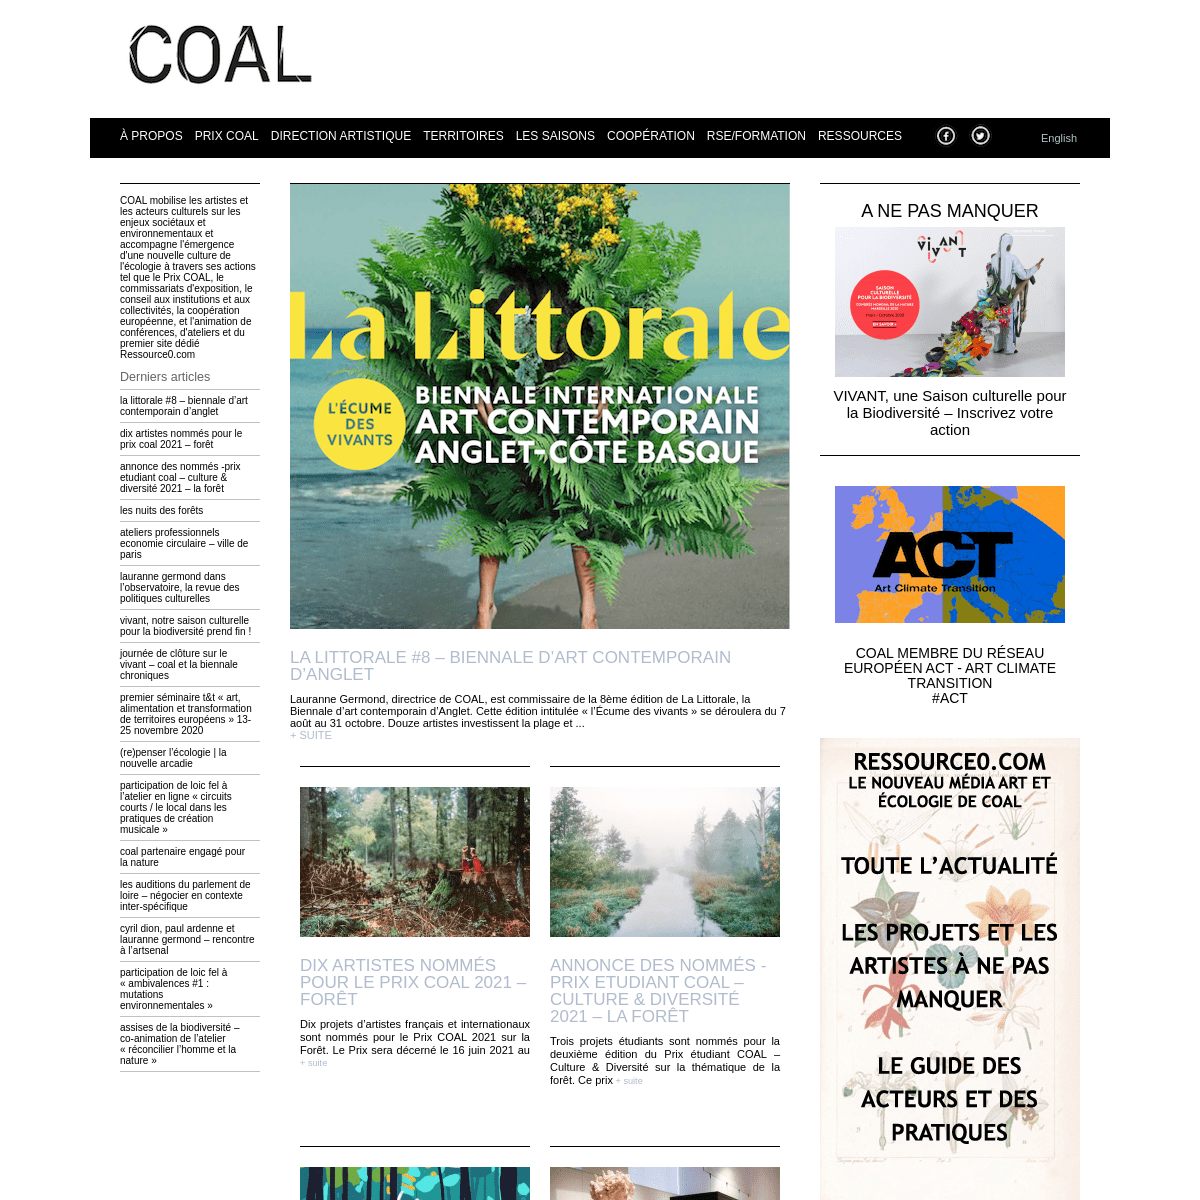 A complete backup of https://projetcoal.org